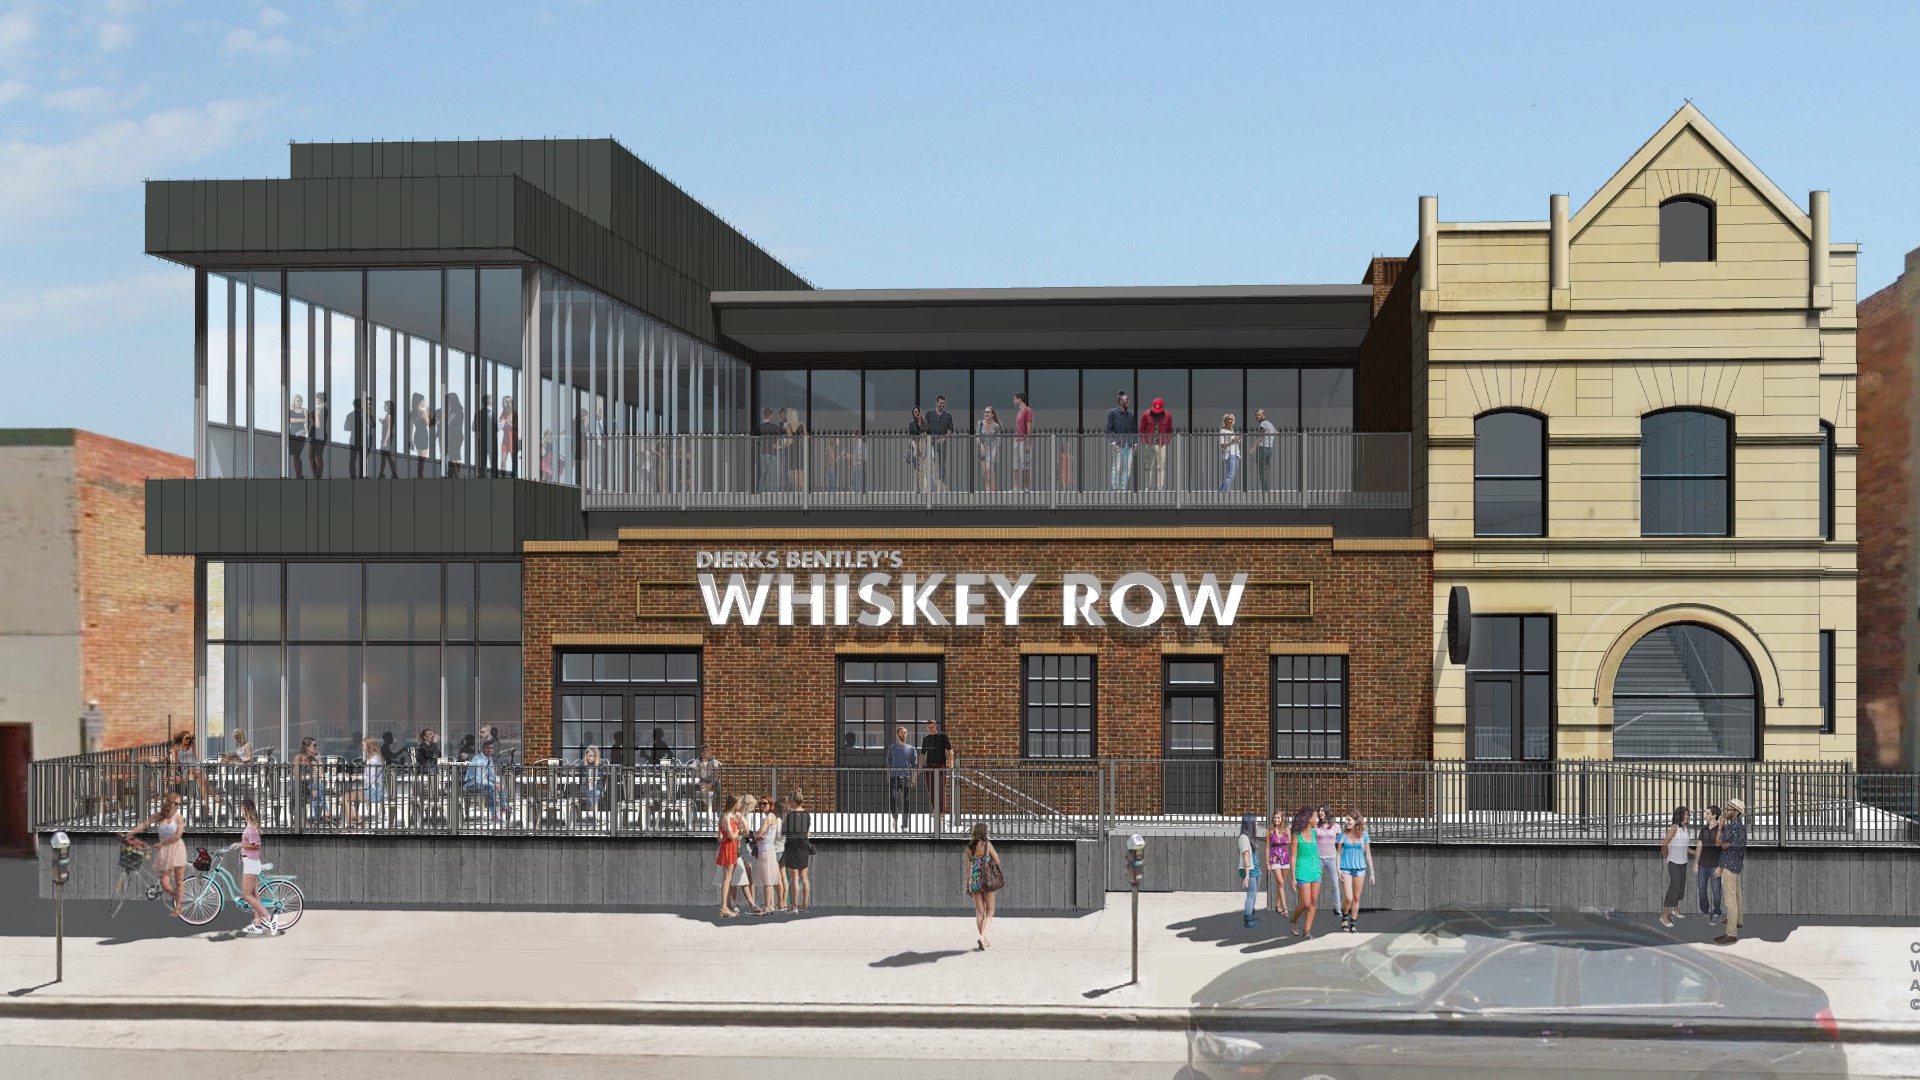 Lodo’s Bar and Grill will transform into Dierks Bentley’s Whiskey Row in 2021.